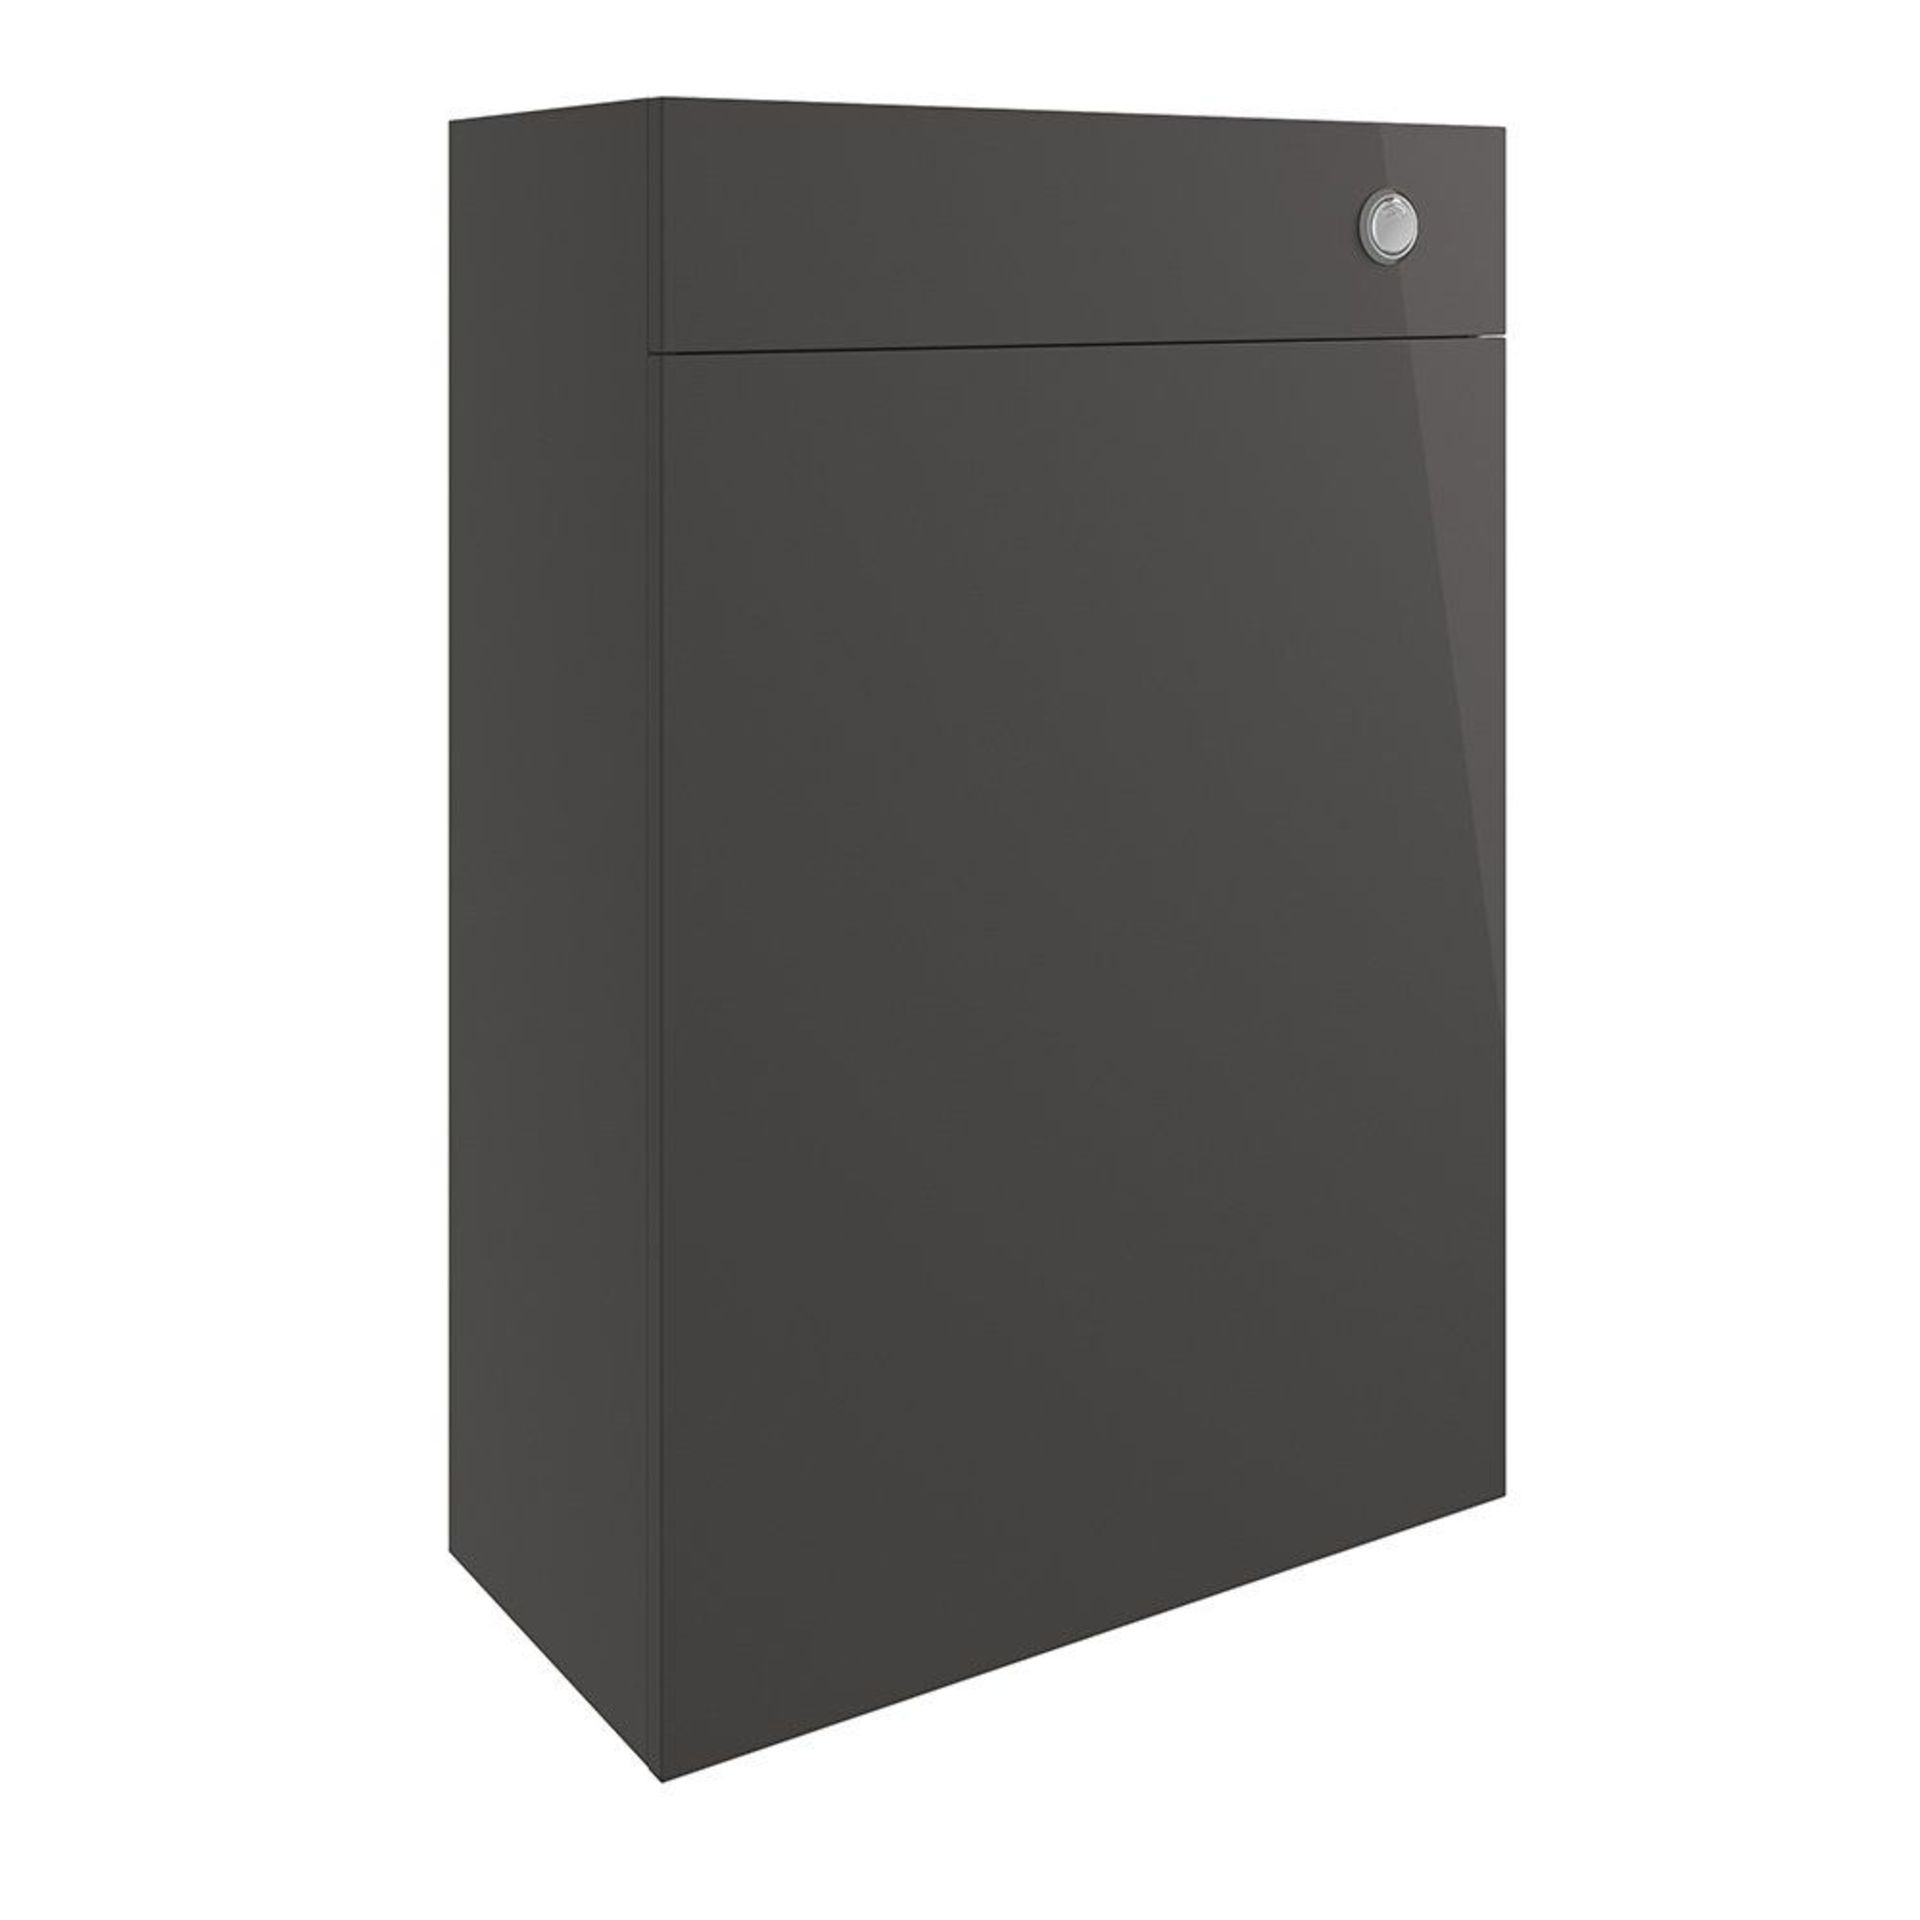 New (P31) Valesso 600mm Full Depth Wc Unit - Onyx Grey Gloss. Rrp £249.99. Pre-Assembled Dura... - Image 2 of 3